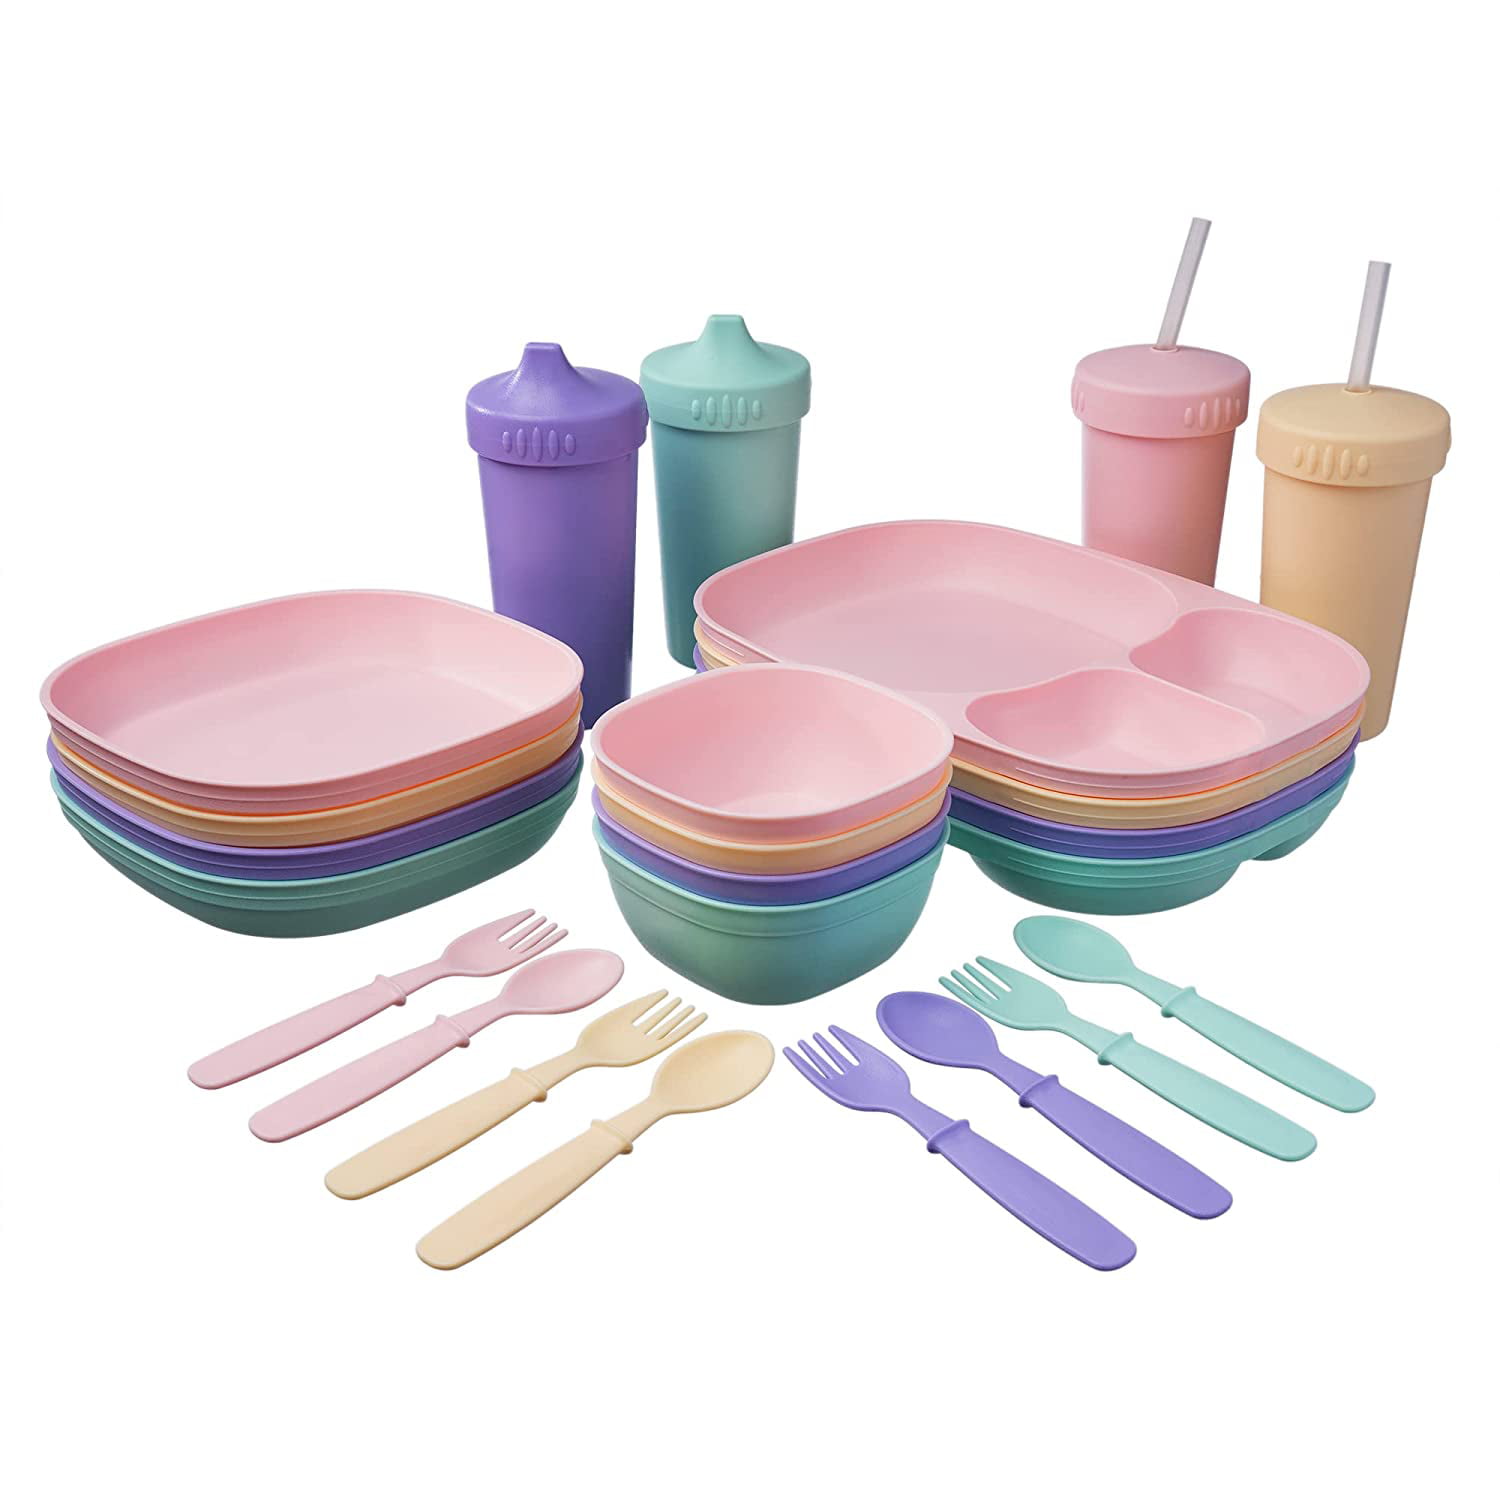 Kids Sip A Bowl And Cup Set Comes With Matching Fork And Spoon Pink Color. 